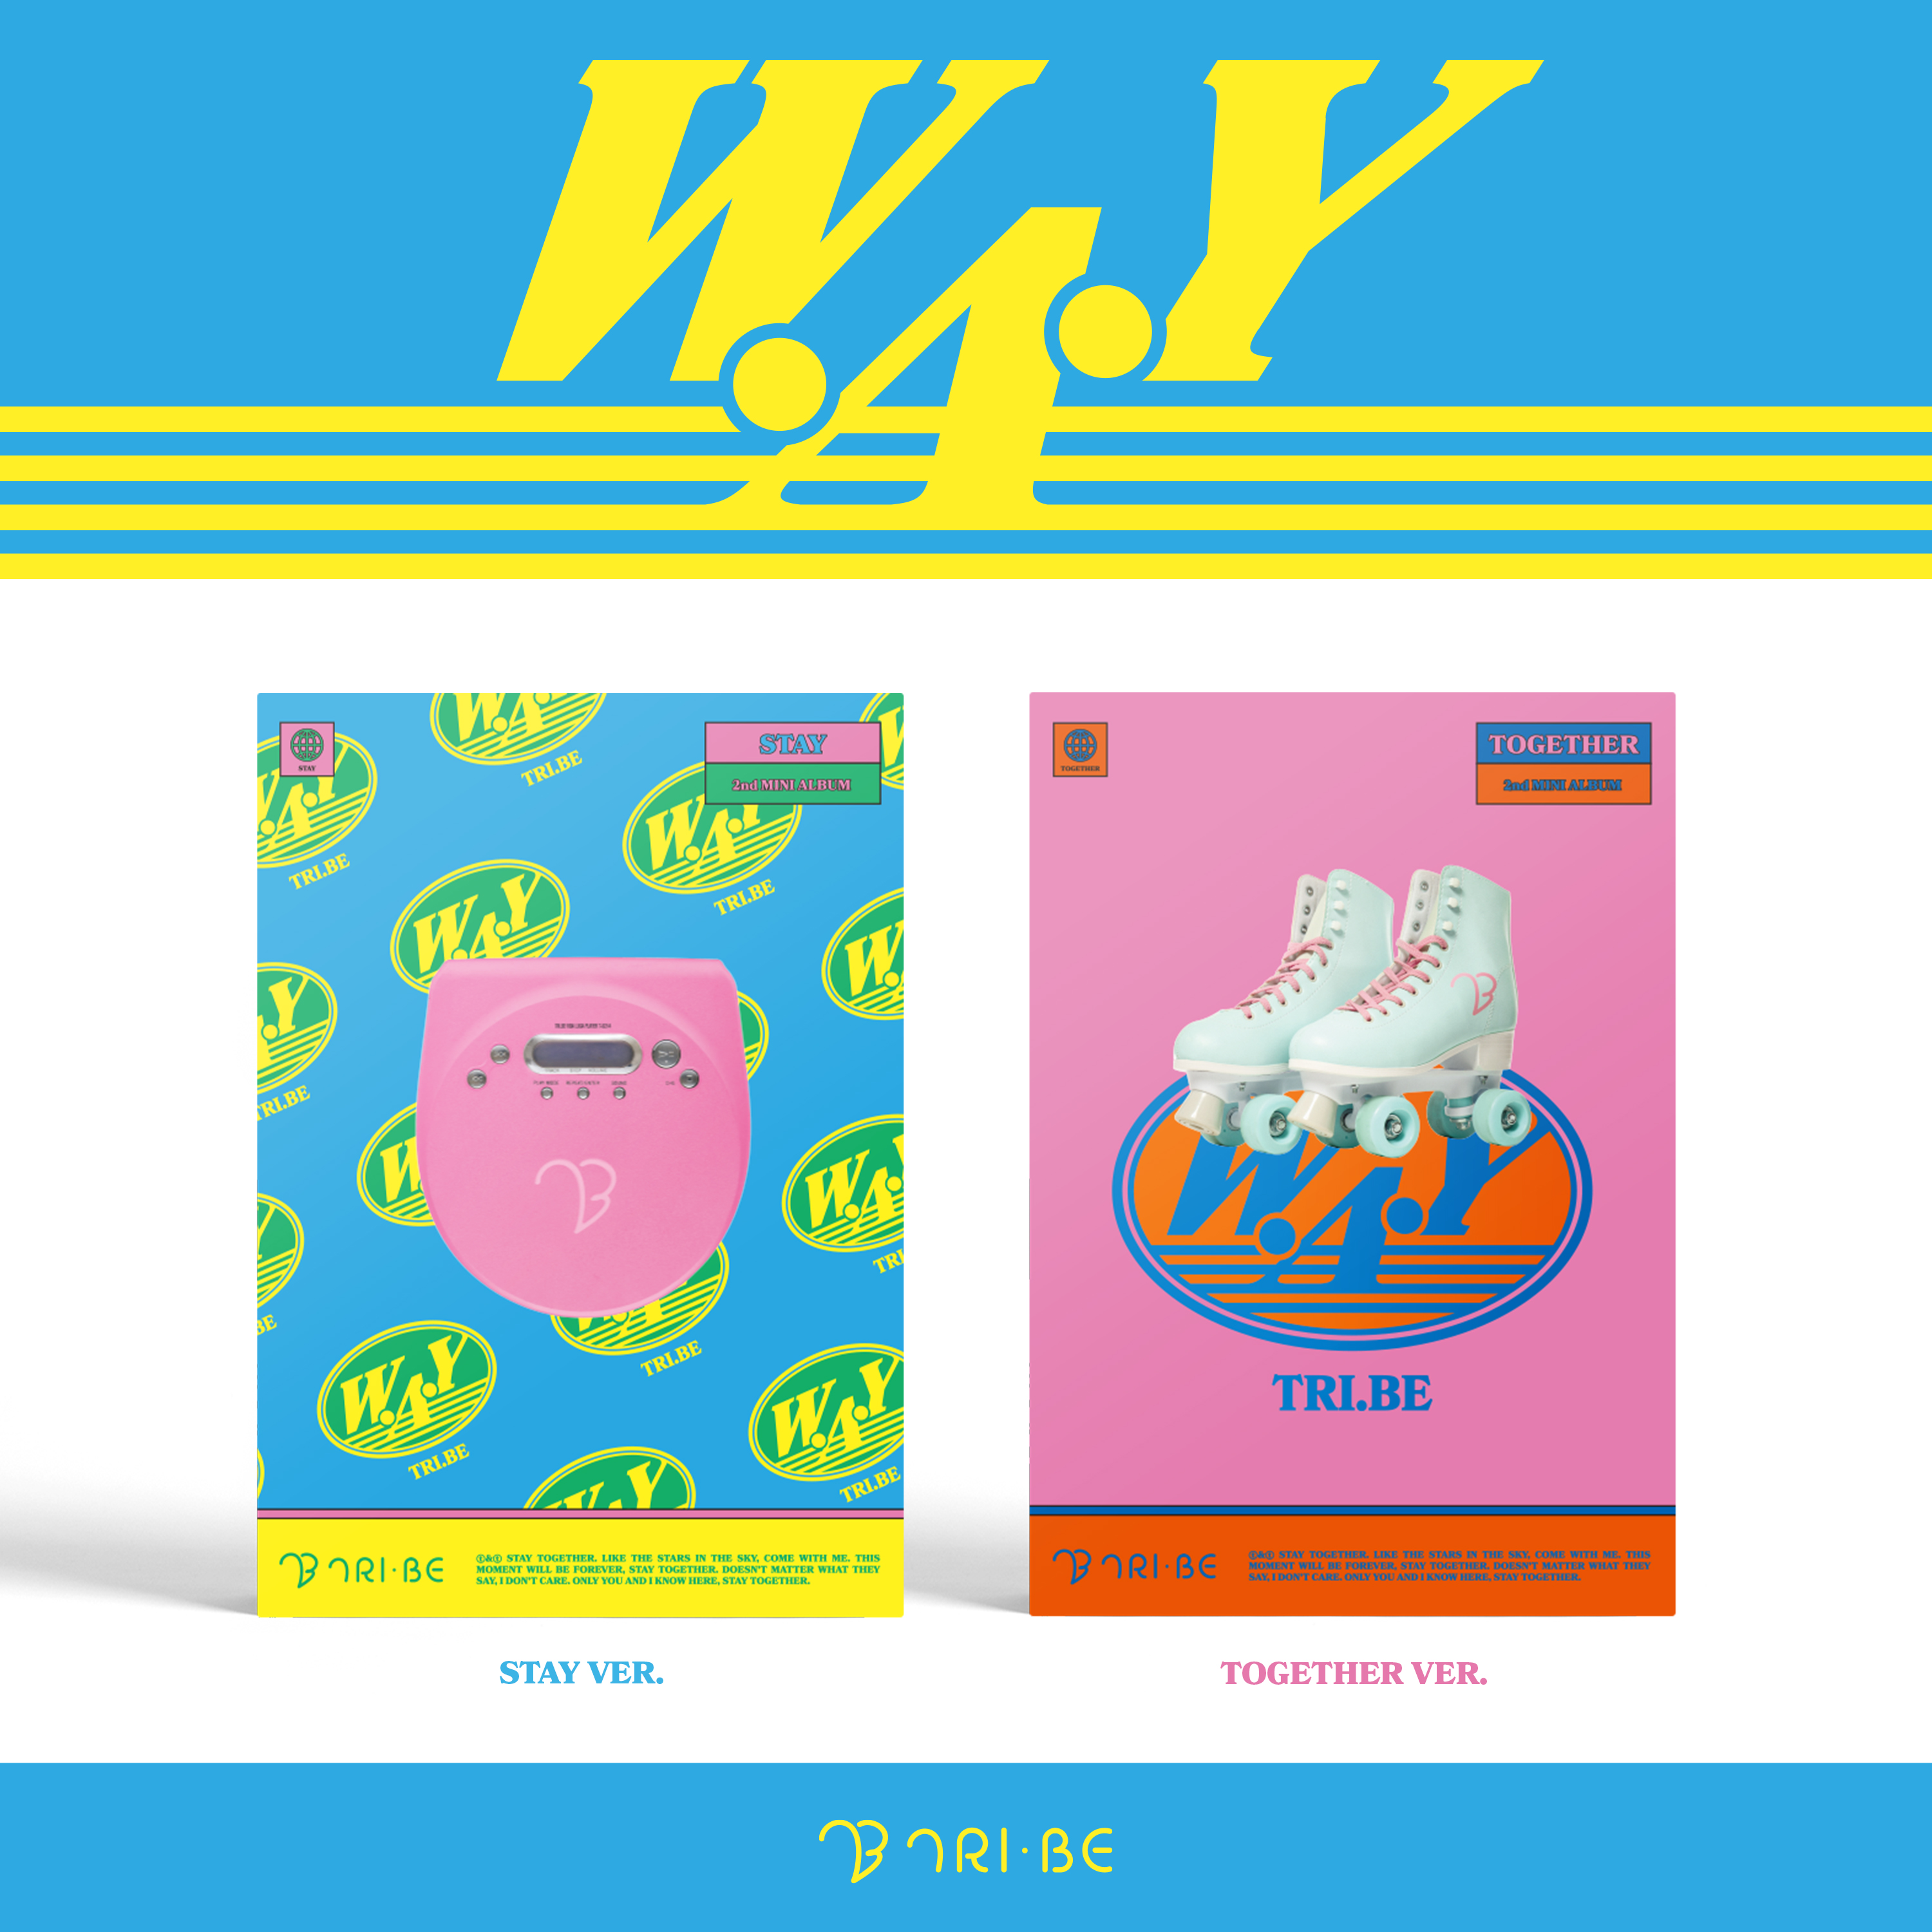 [Ktown4u Special Gift] [2CD SET] TRI.BE - 2nd Mini Album [W.A.Y] (STAY Ver. + TOGETHER Ver.)